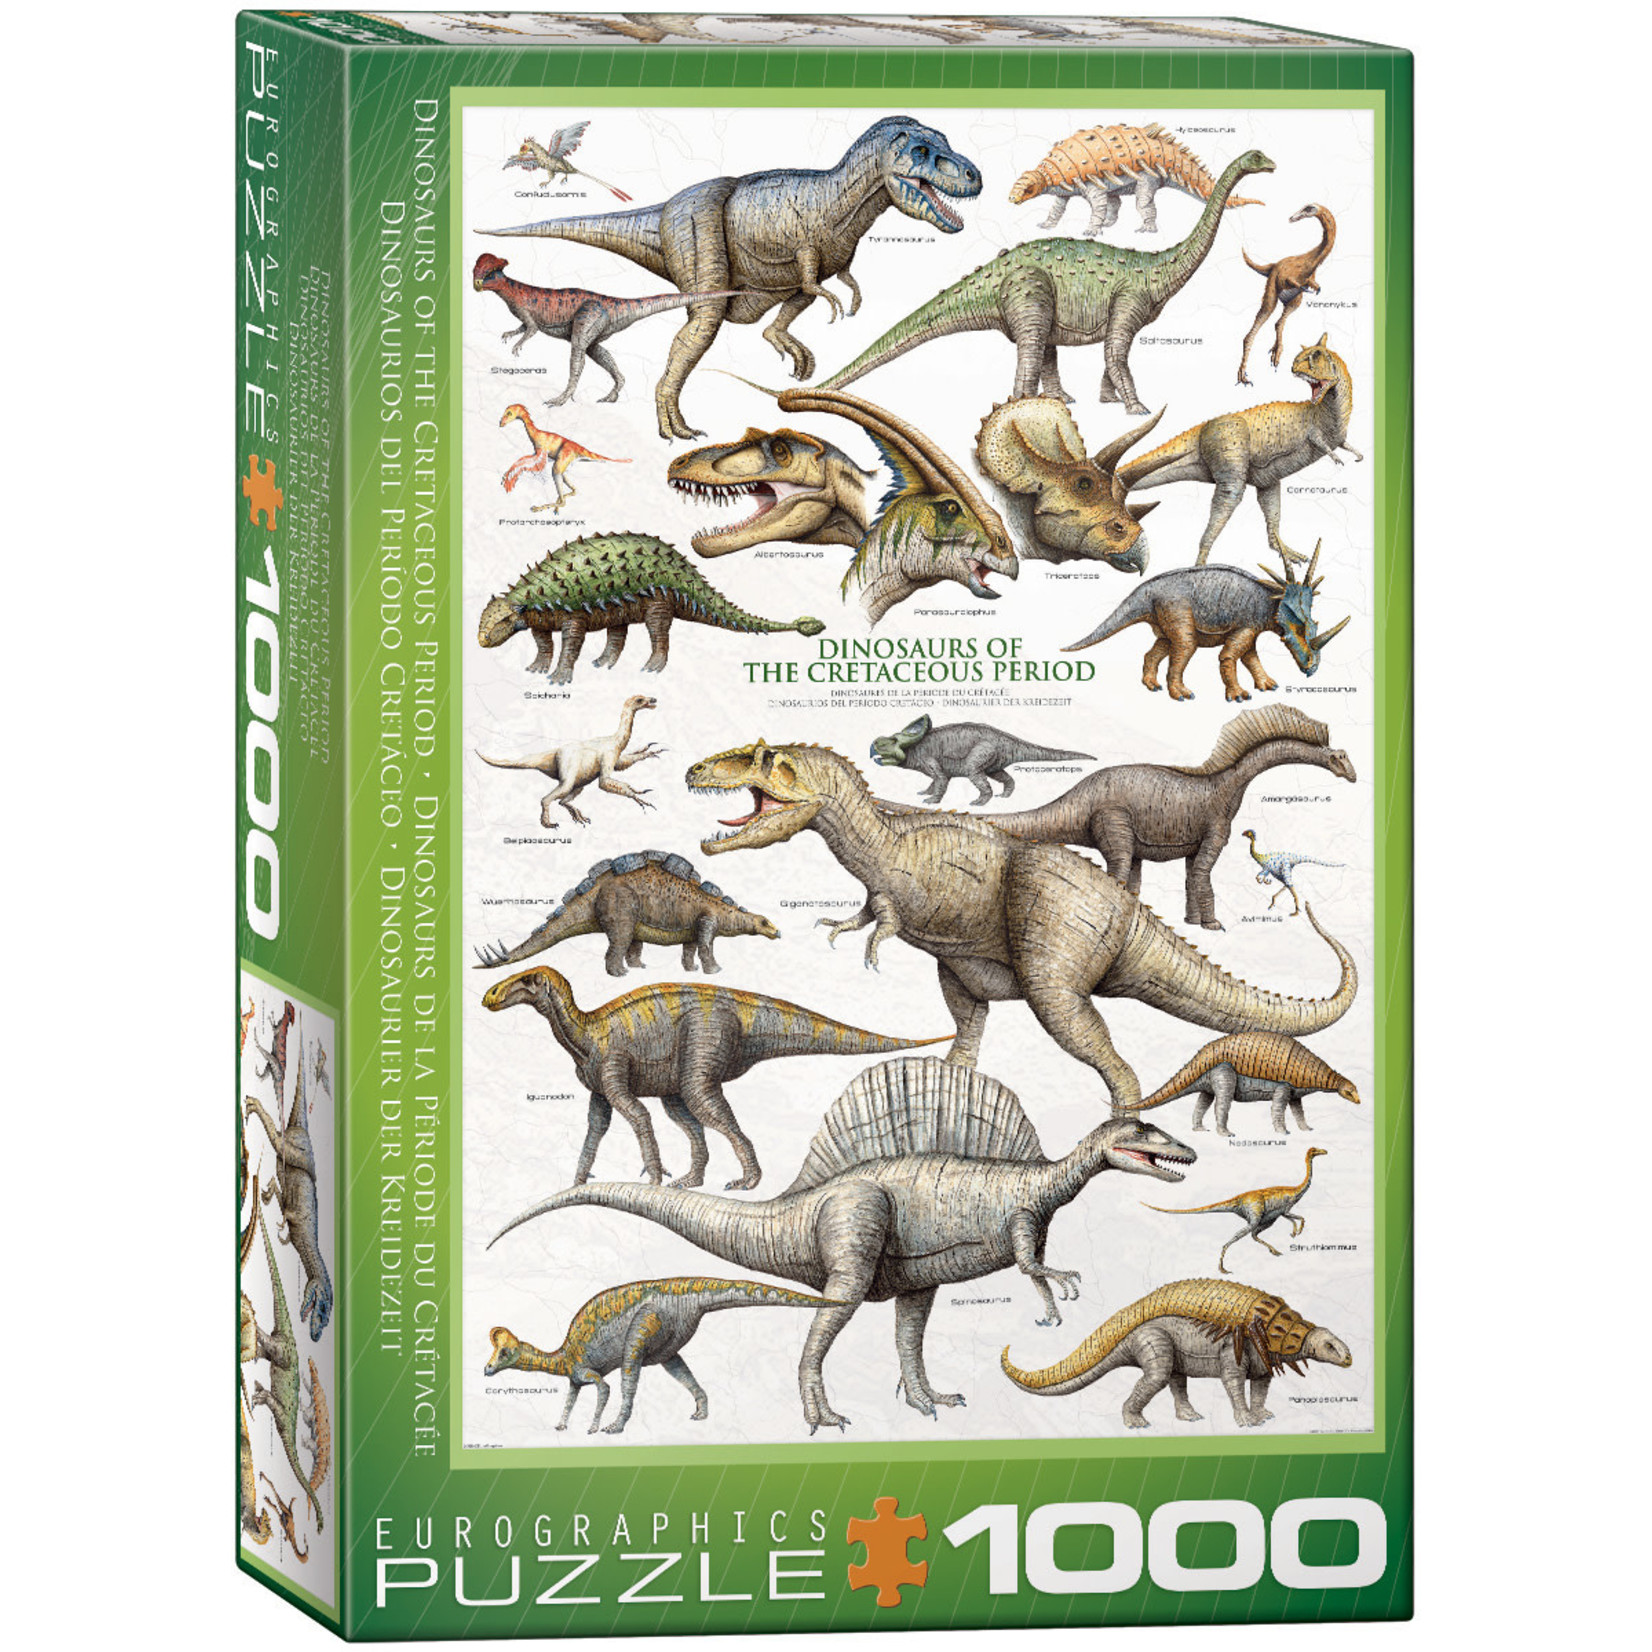 Eurographics Dinosaurs of the Cretaceous Period